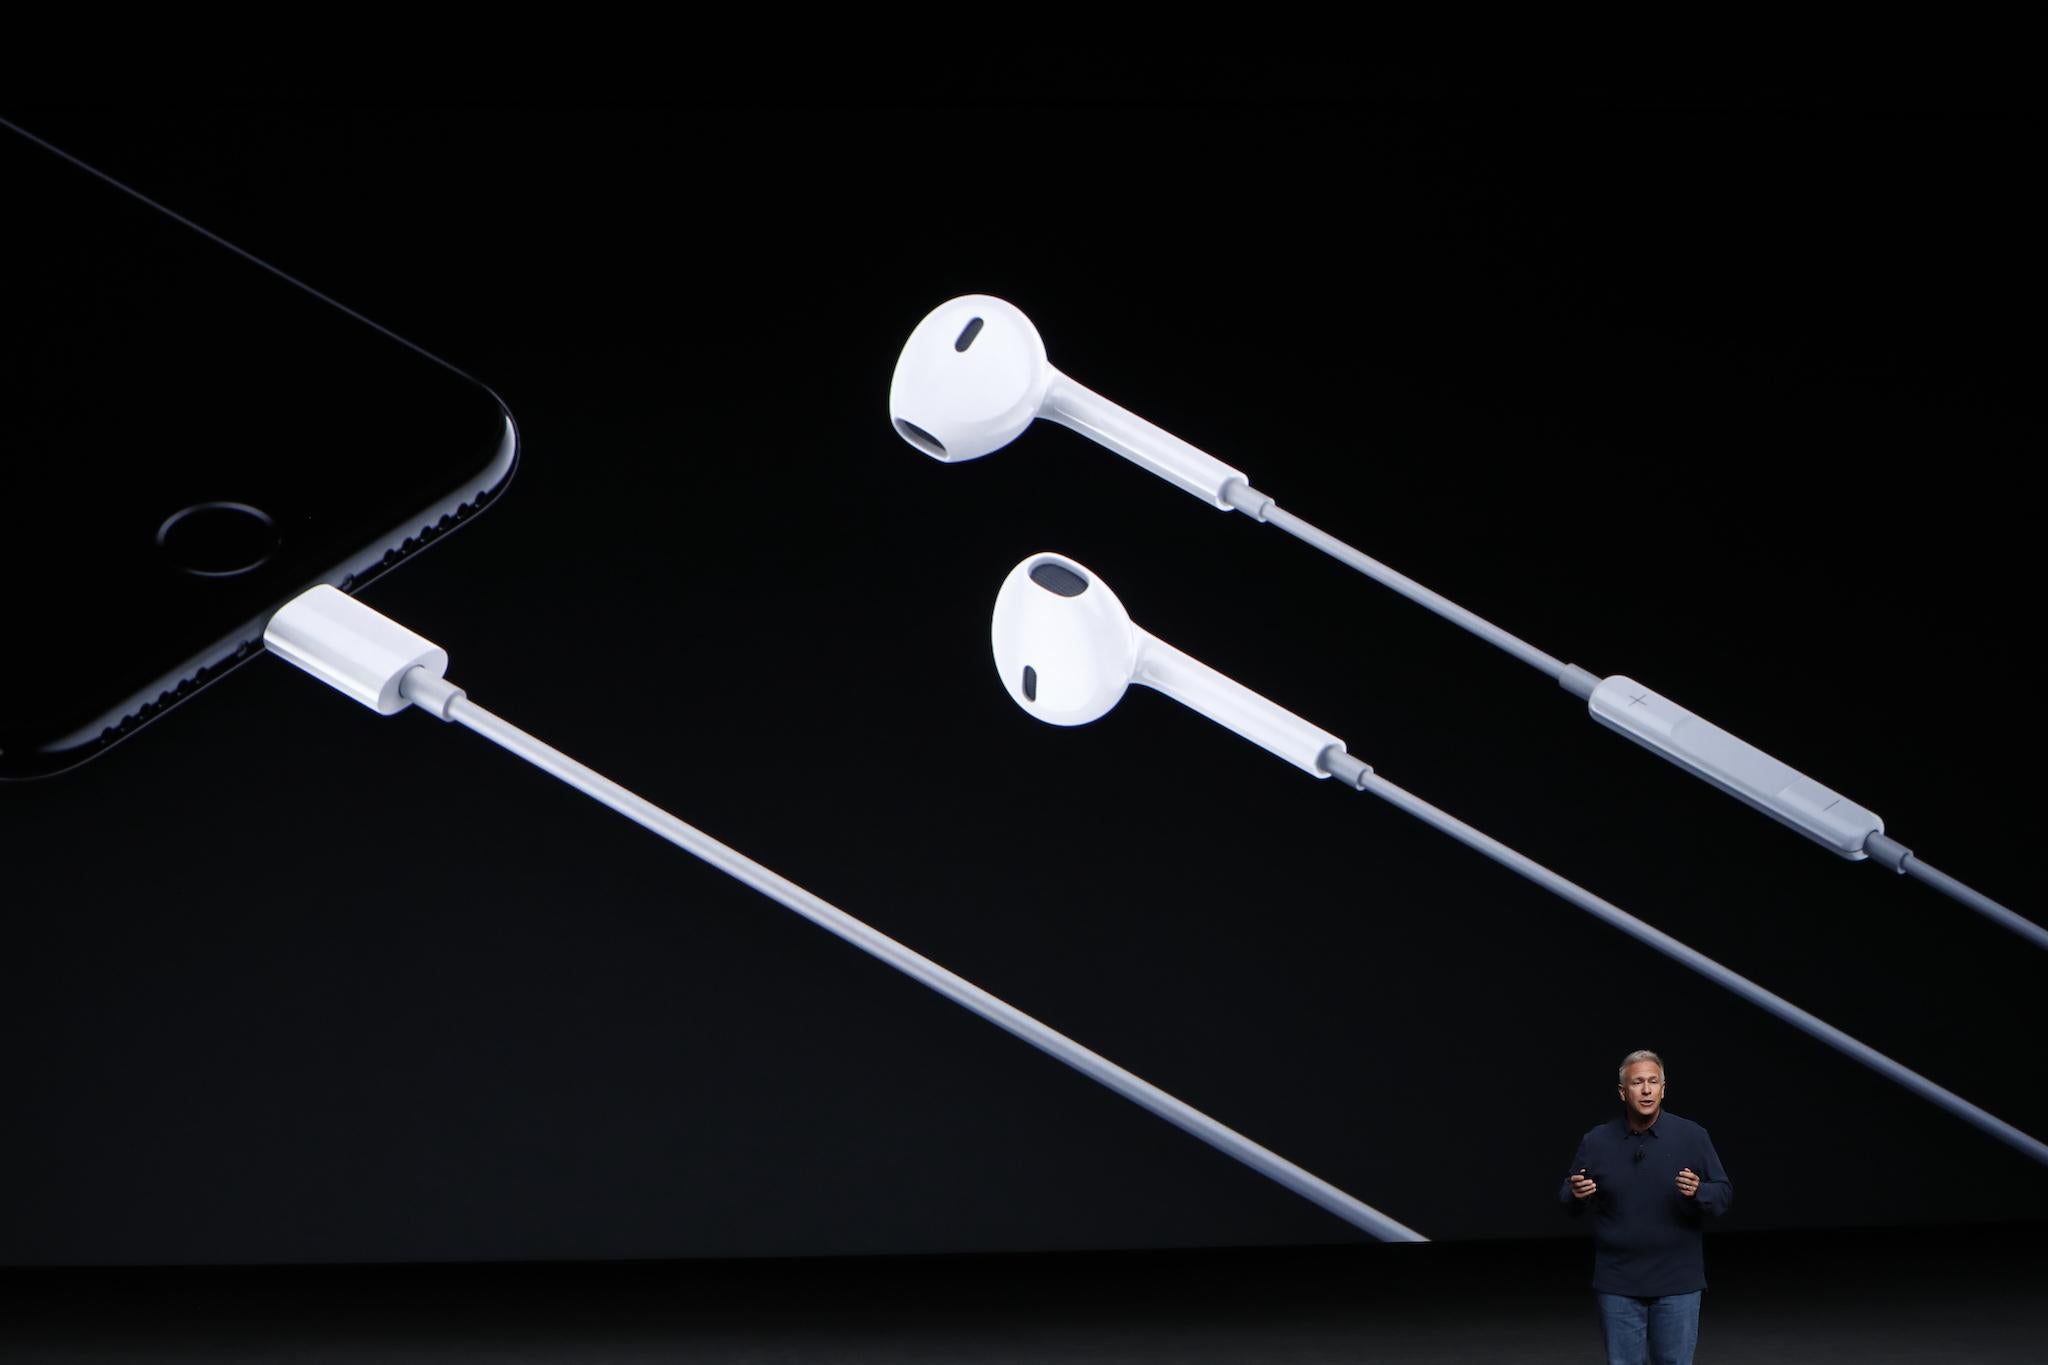 Apple Senior Vice President of Worldwide Marketing Phil Schiller introduces Lightning headphones during a launch event on September 7, 2016 in San Francisco, California